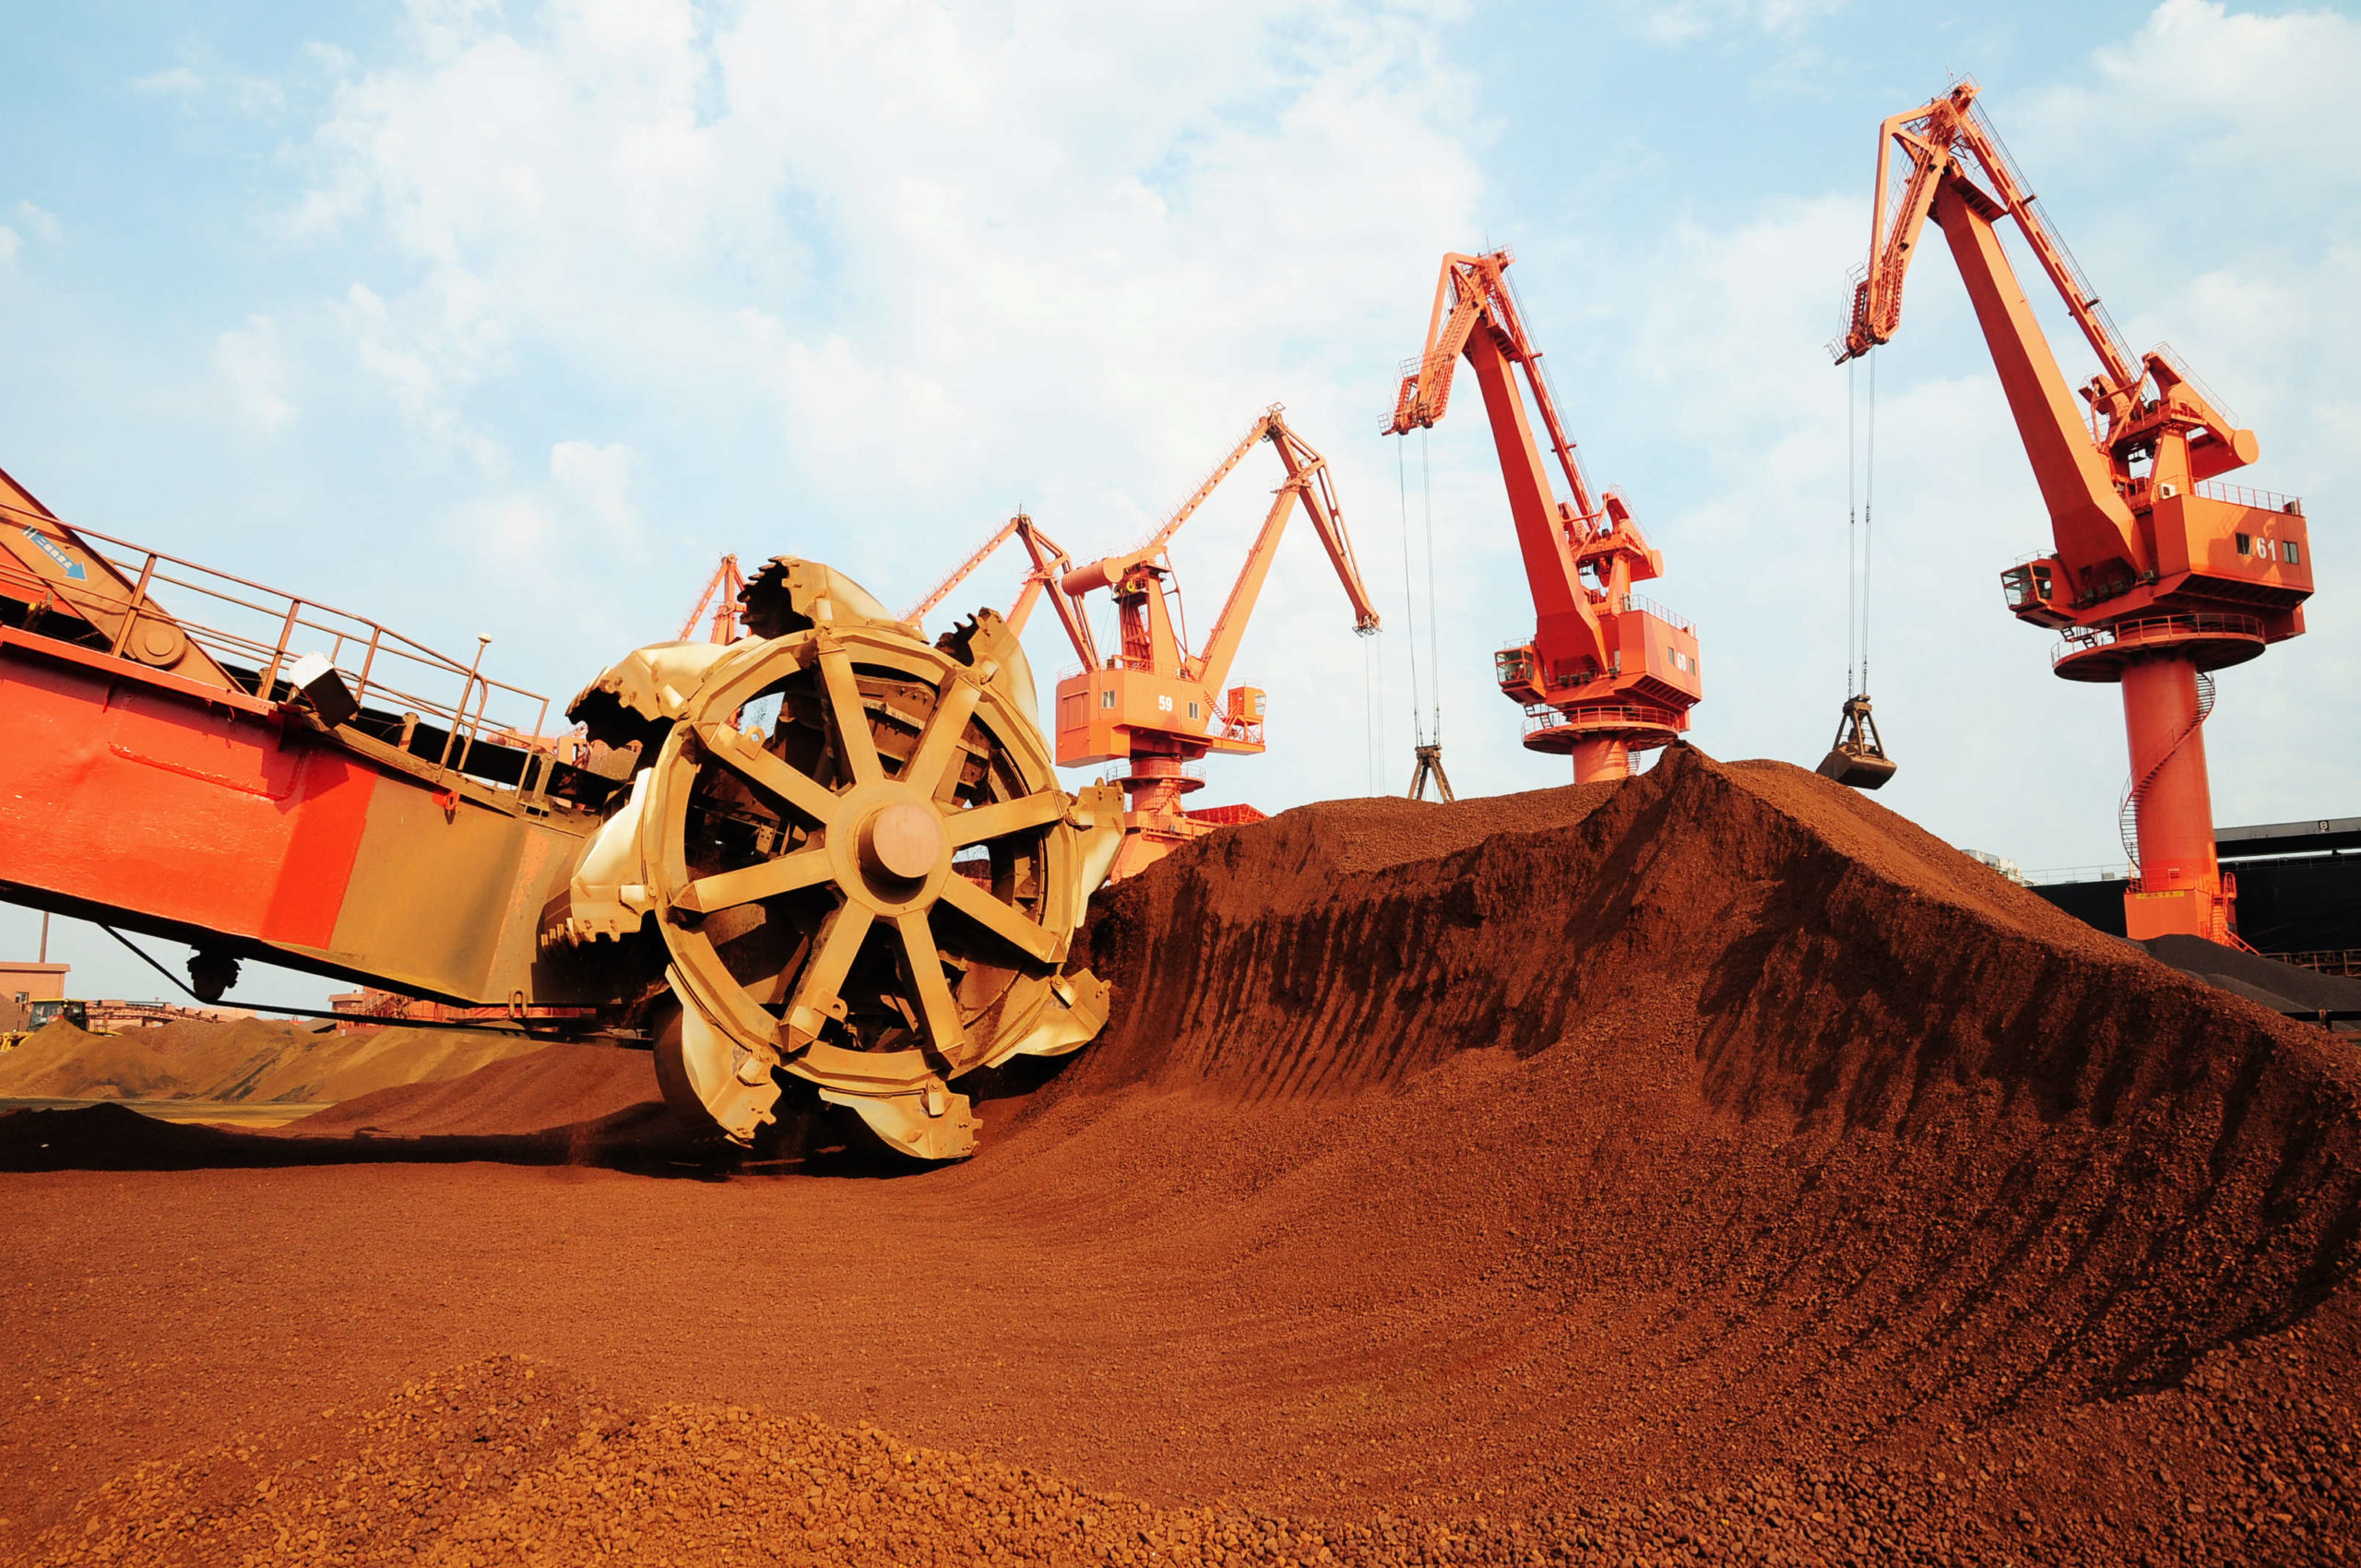 Iron ore costs hit multi-year highs on China infrastructure funding